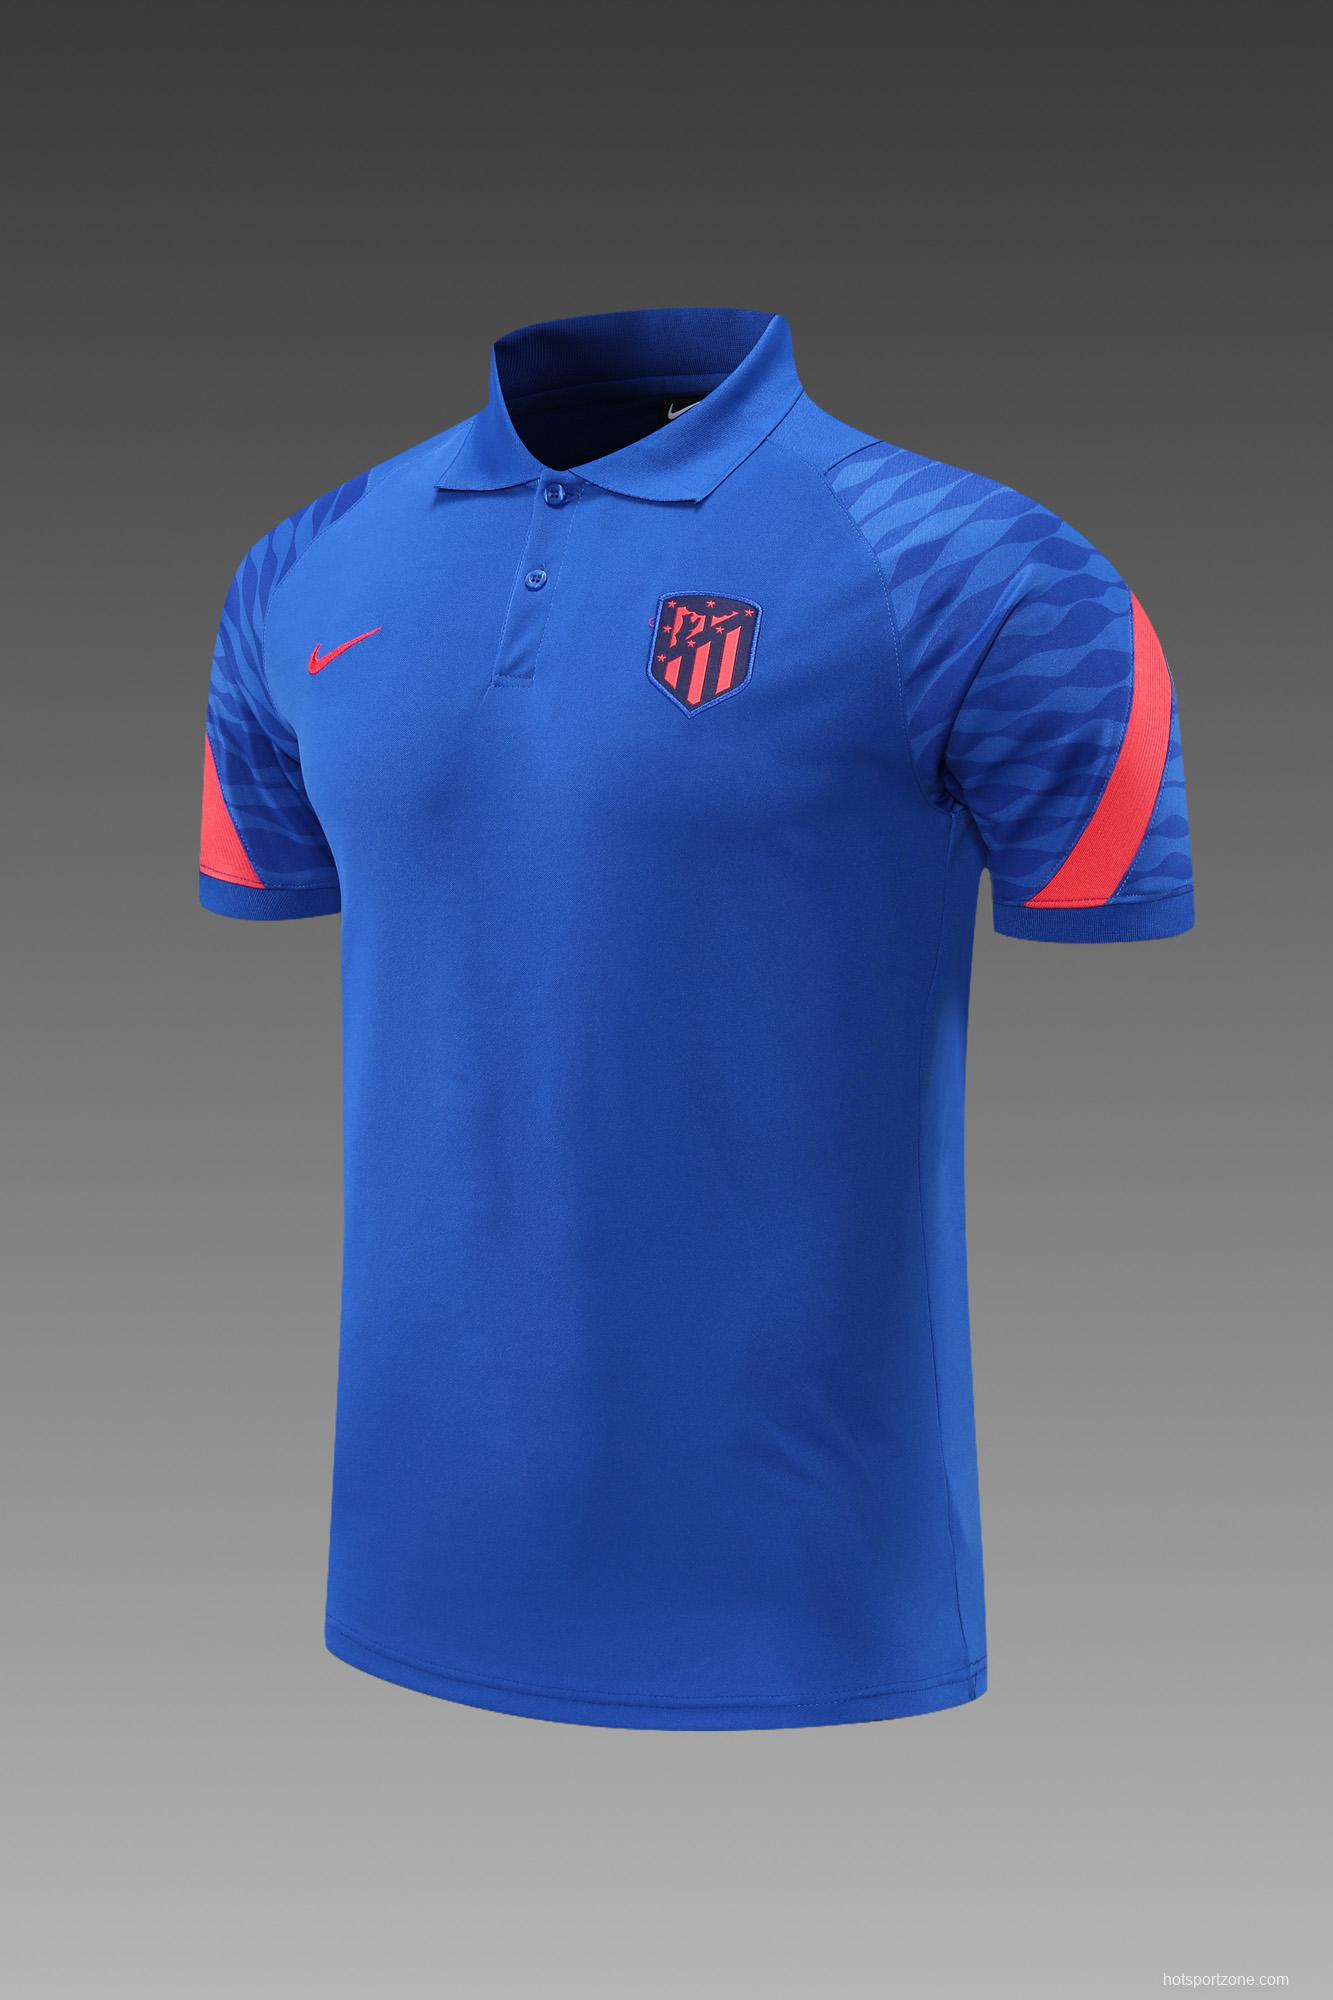 Atletico Madrid POLO kit Diamond Blue(not supported to be sold separately)